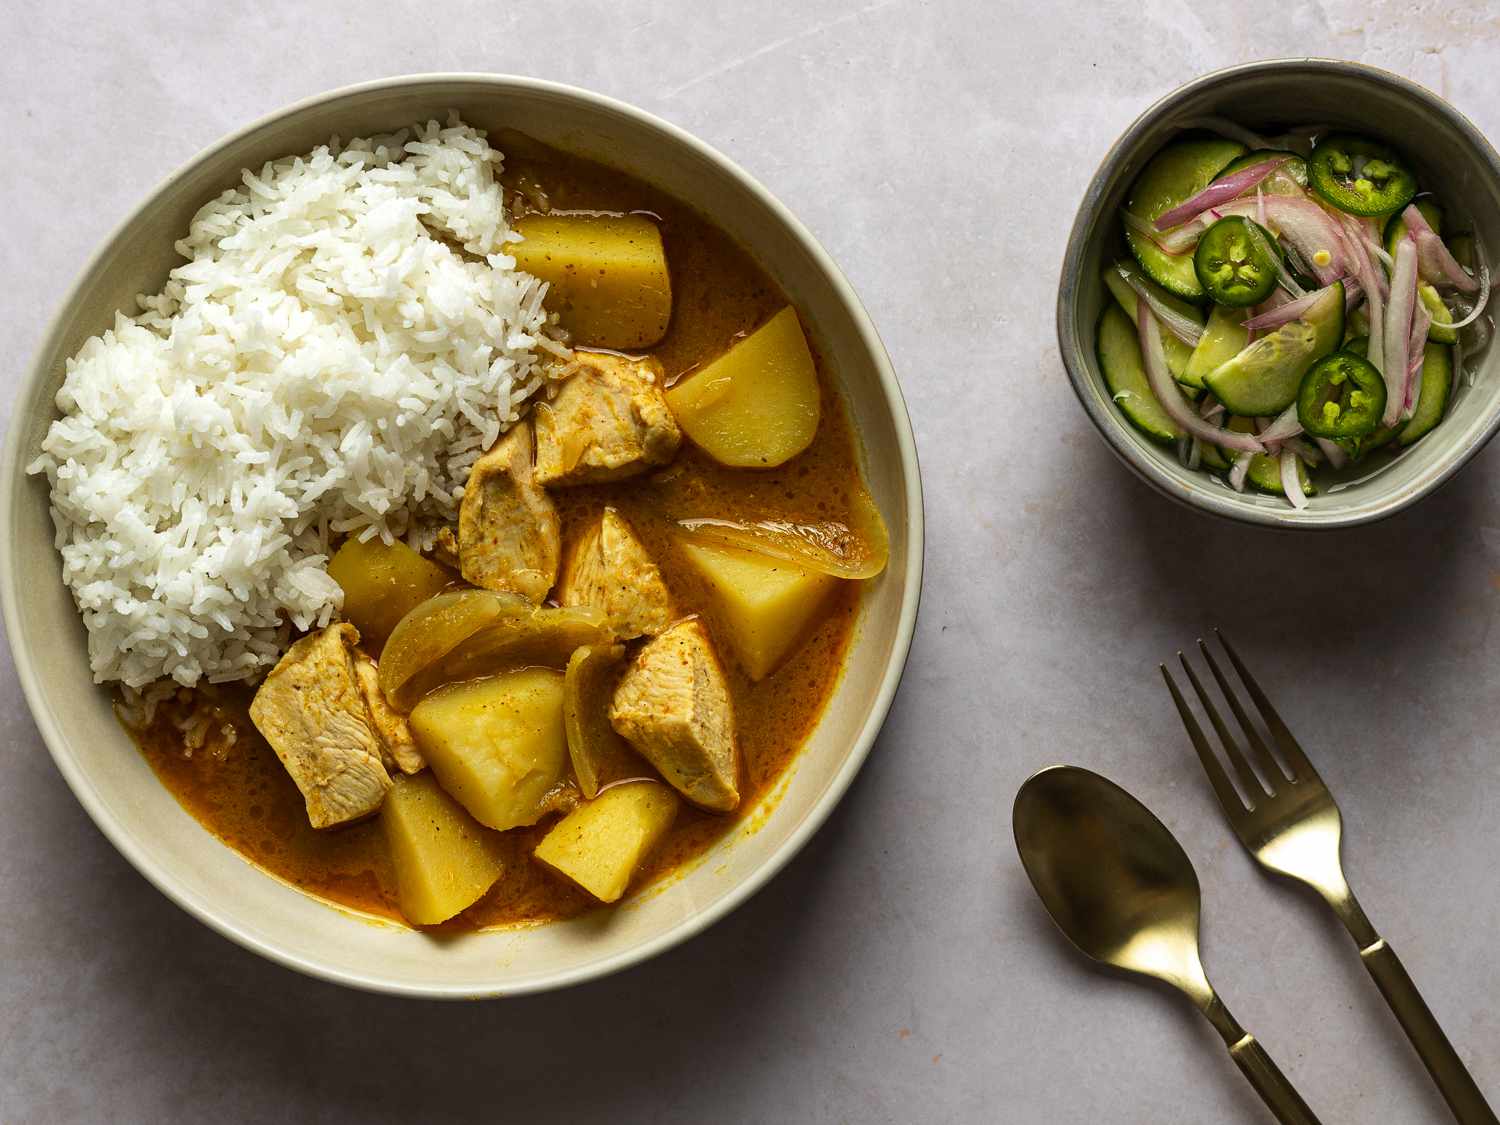 A bowl of Thai chicken yellow curry in a cream colored ceramic bowl. On the right side of the image is a smaller bowl holding the accompanying cucumber salad. There are a fork and spoon in the bottom right hand corner of the image.